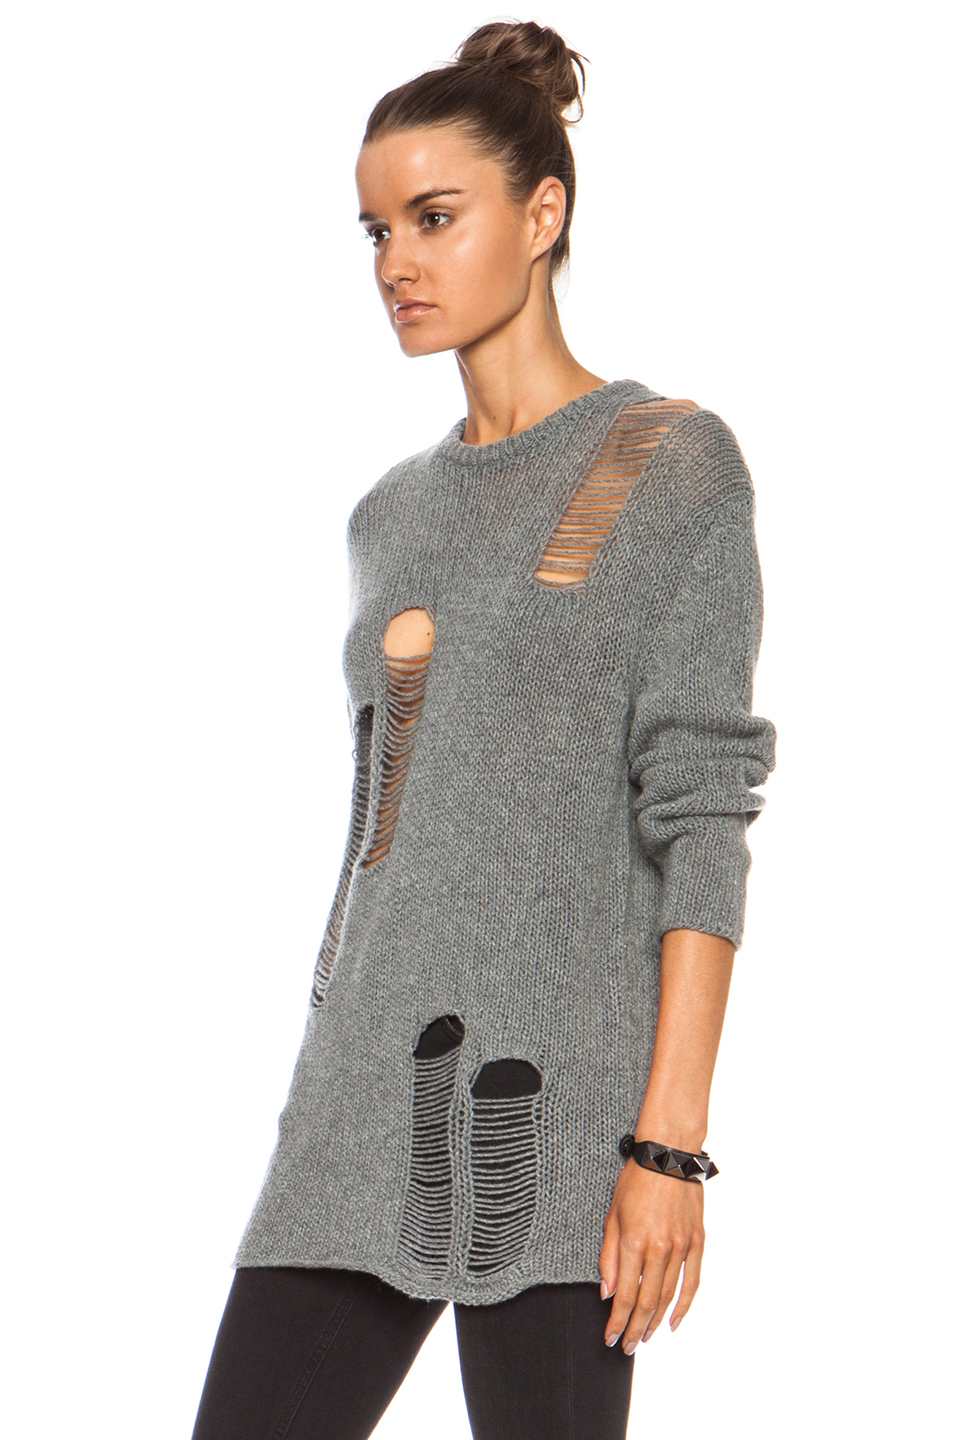 Download R13 Shredded Crew Cashmere Sweater in Gray (Heather Grey ...